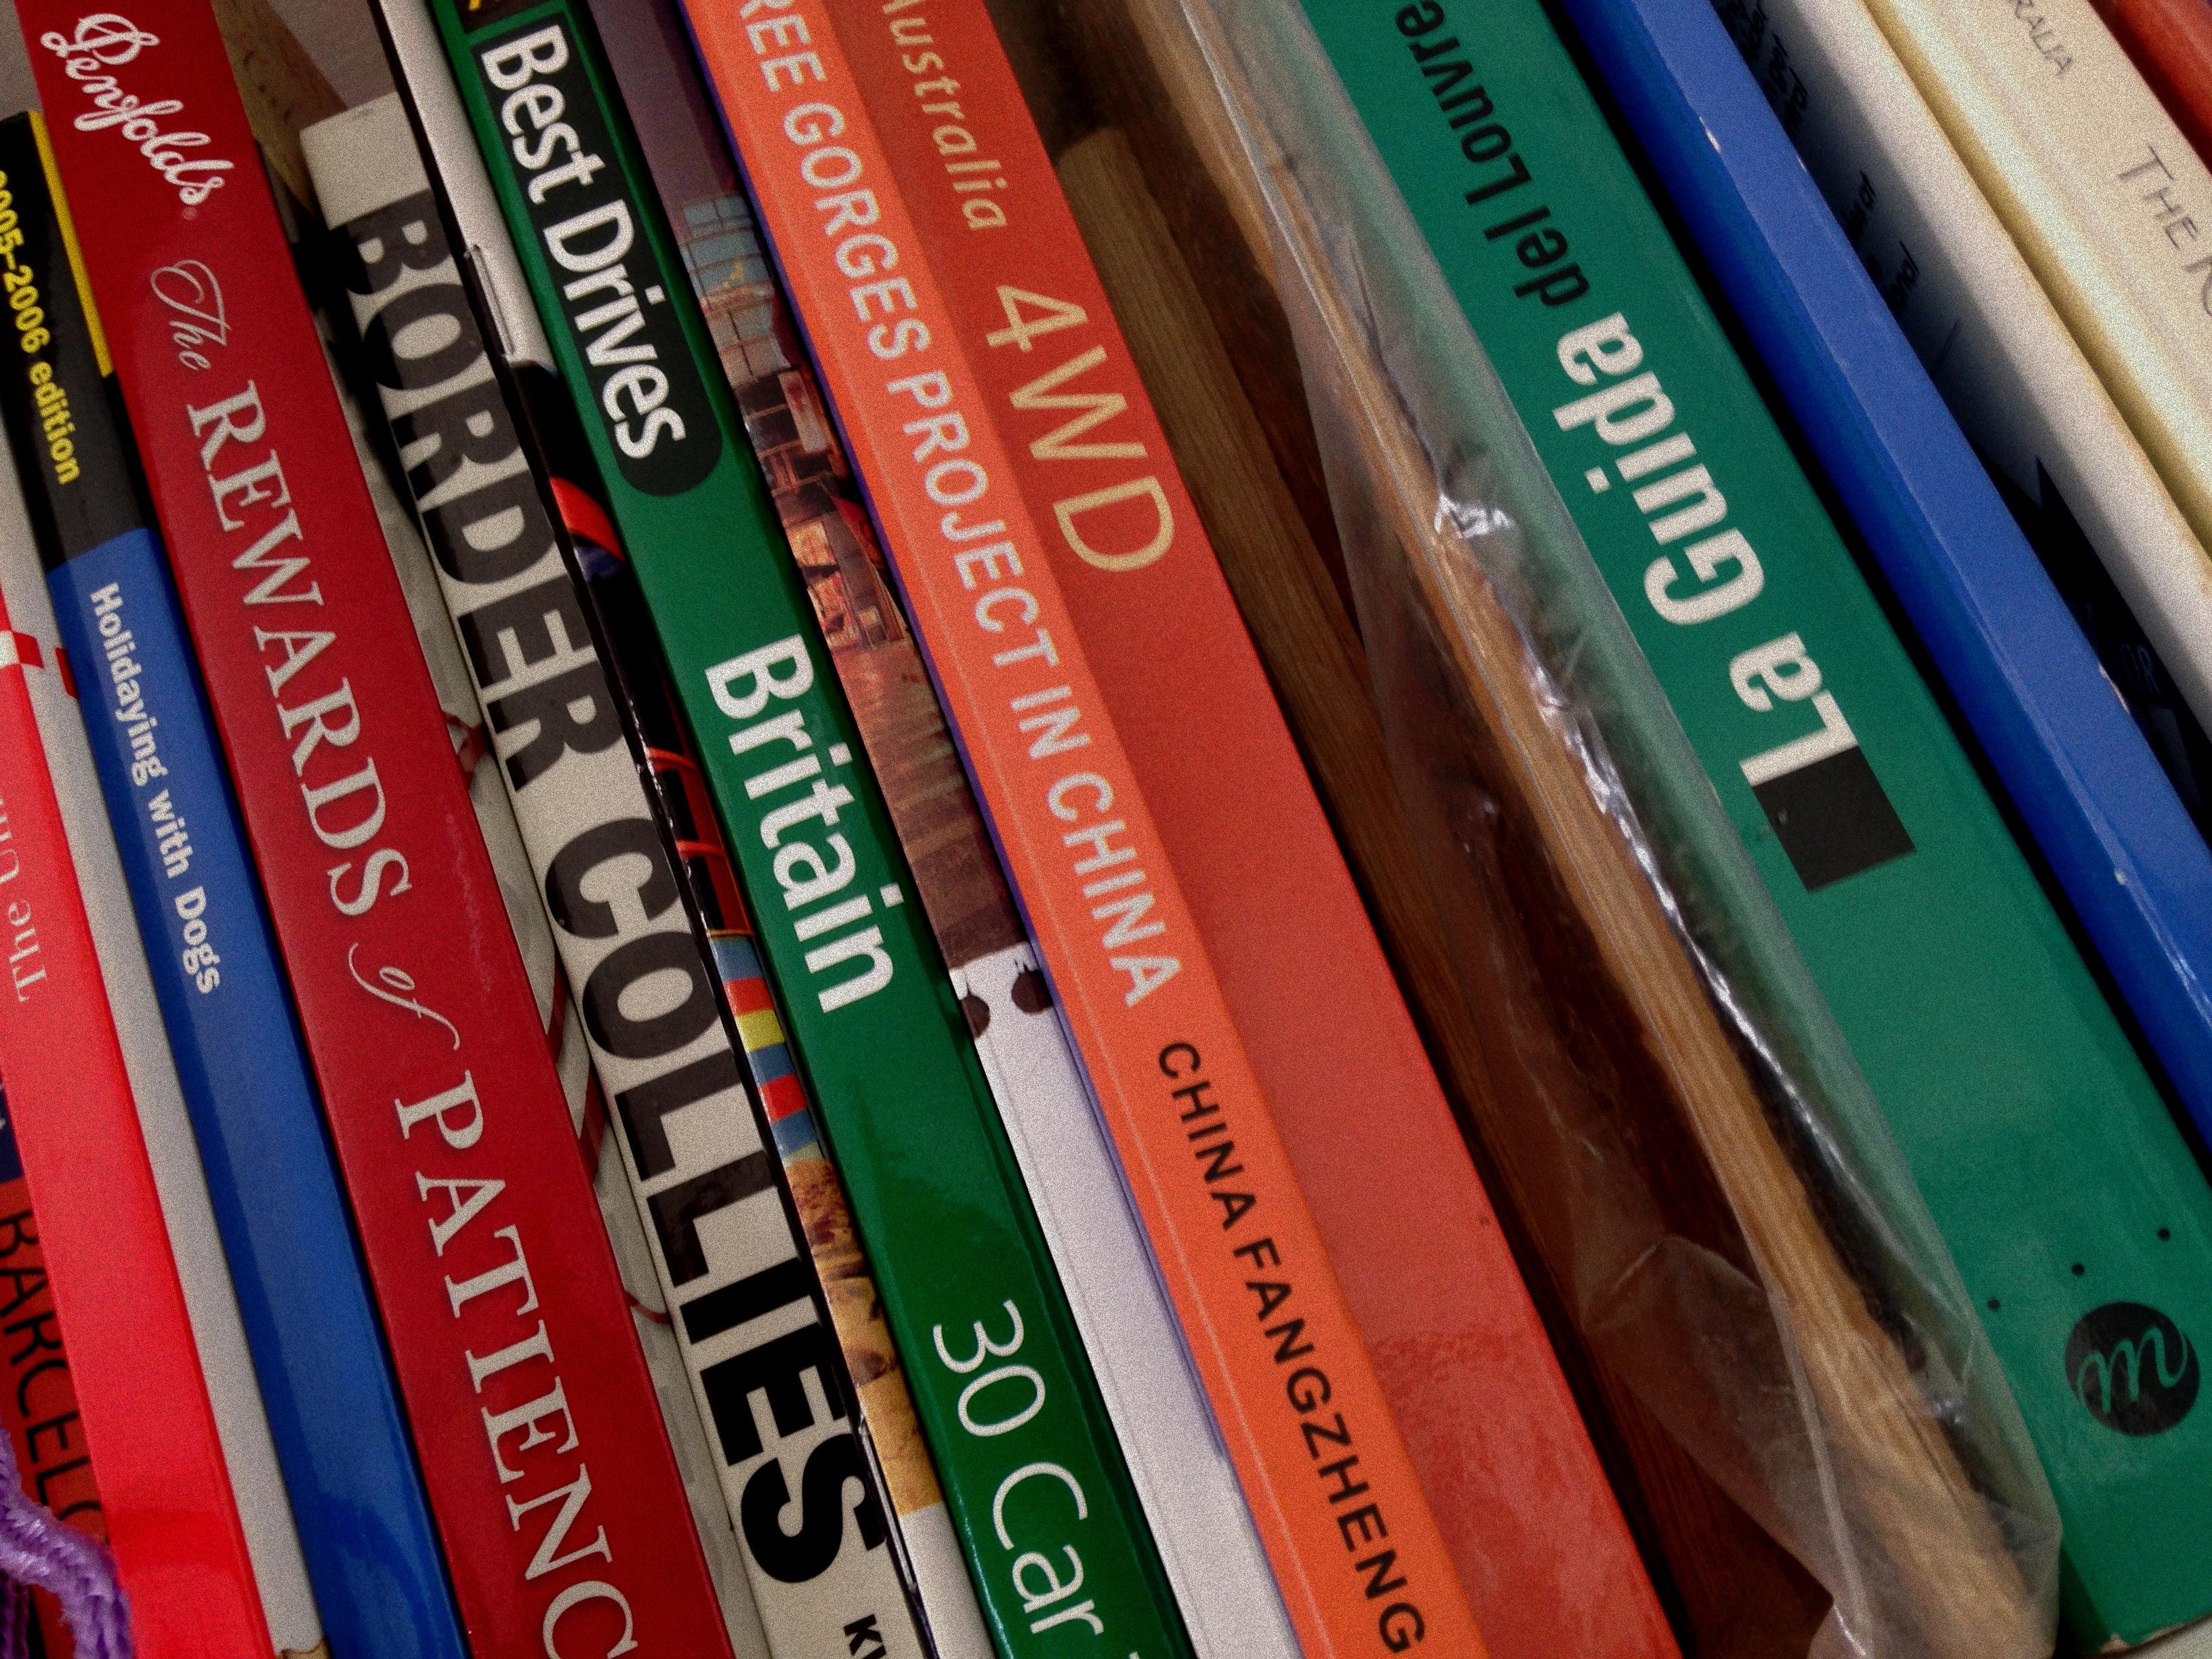 What are some good ways to sell used textbooks?